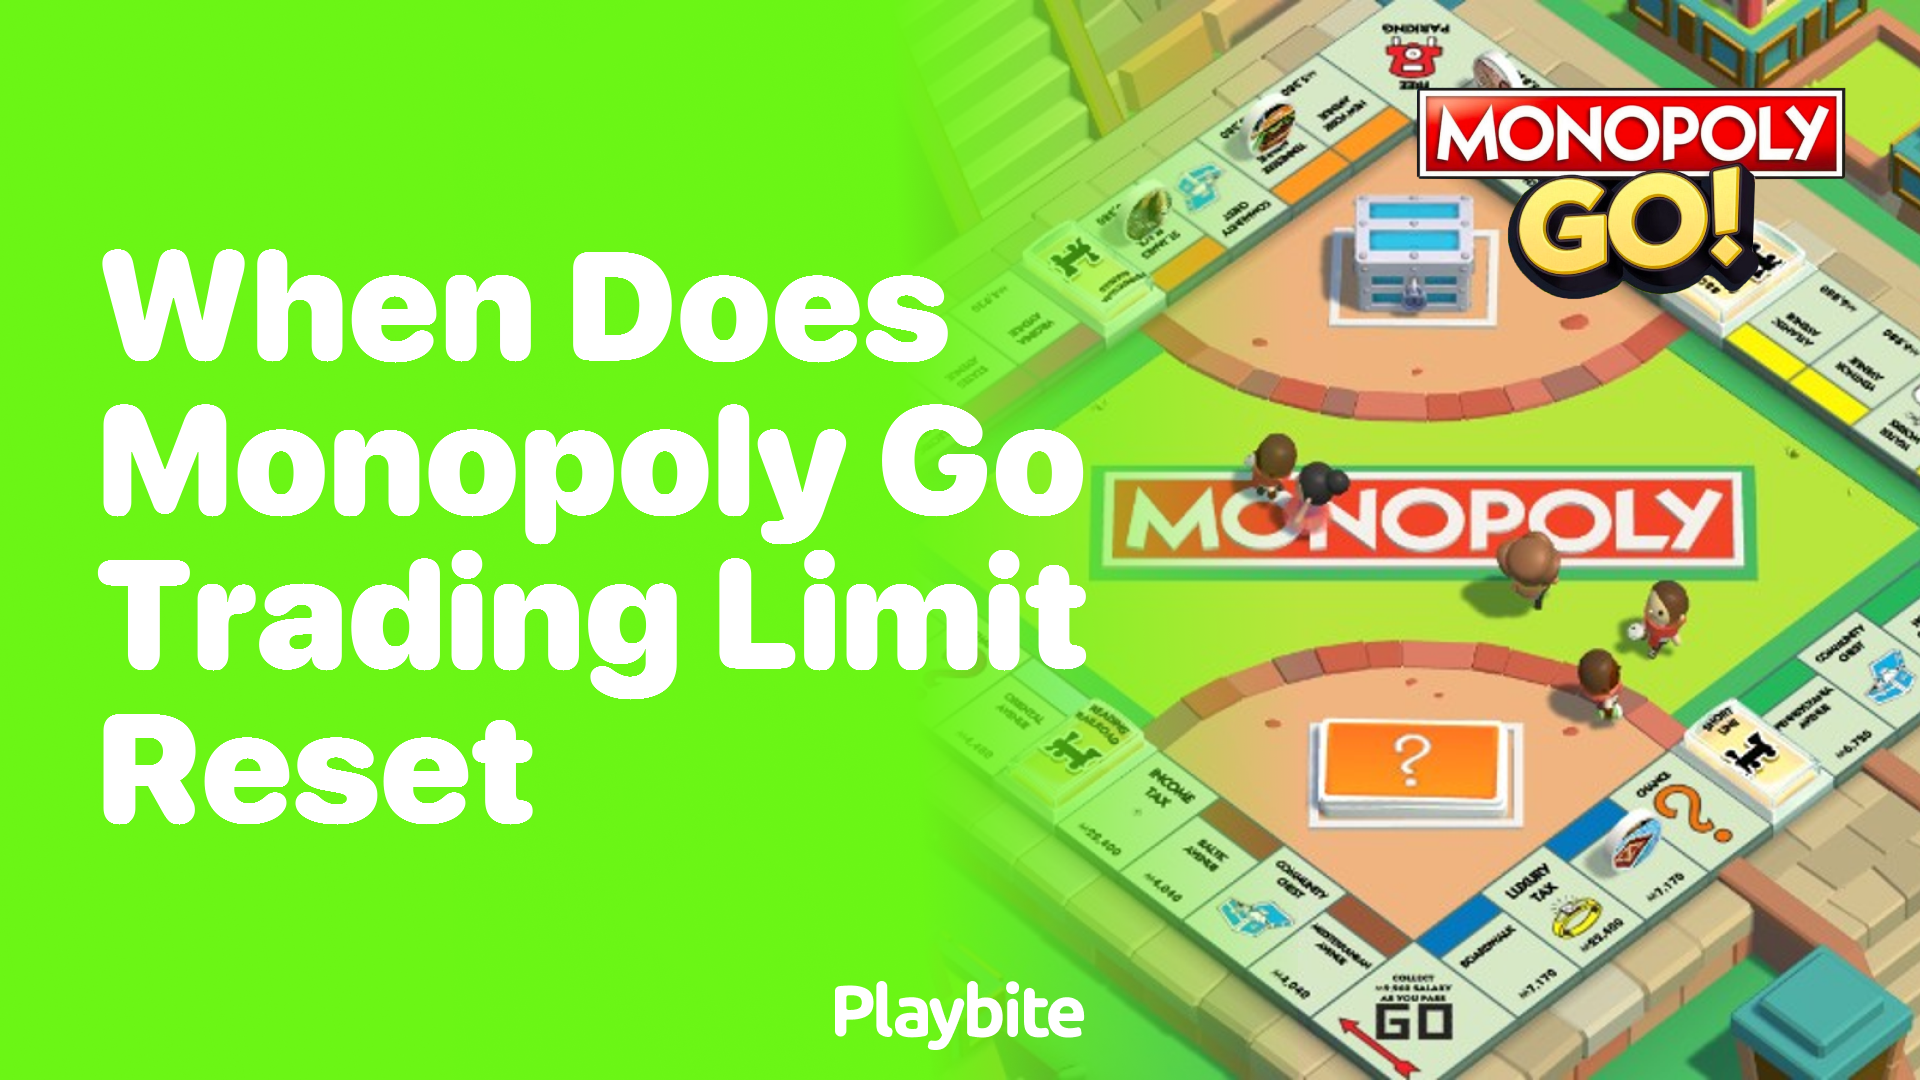 When Does the Monopoly Go Trading Limit Reset?